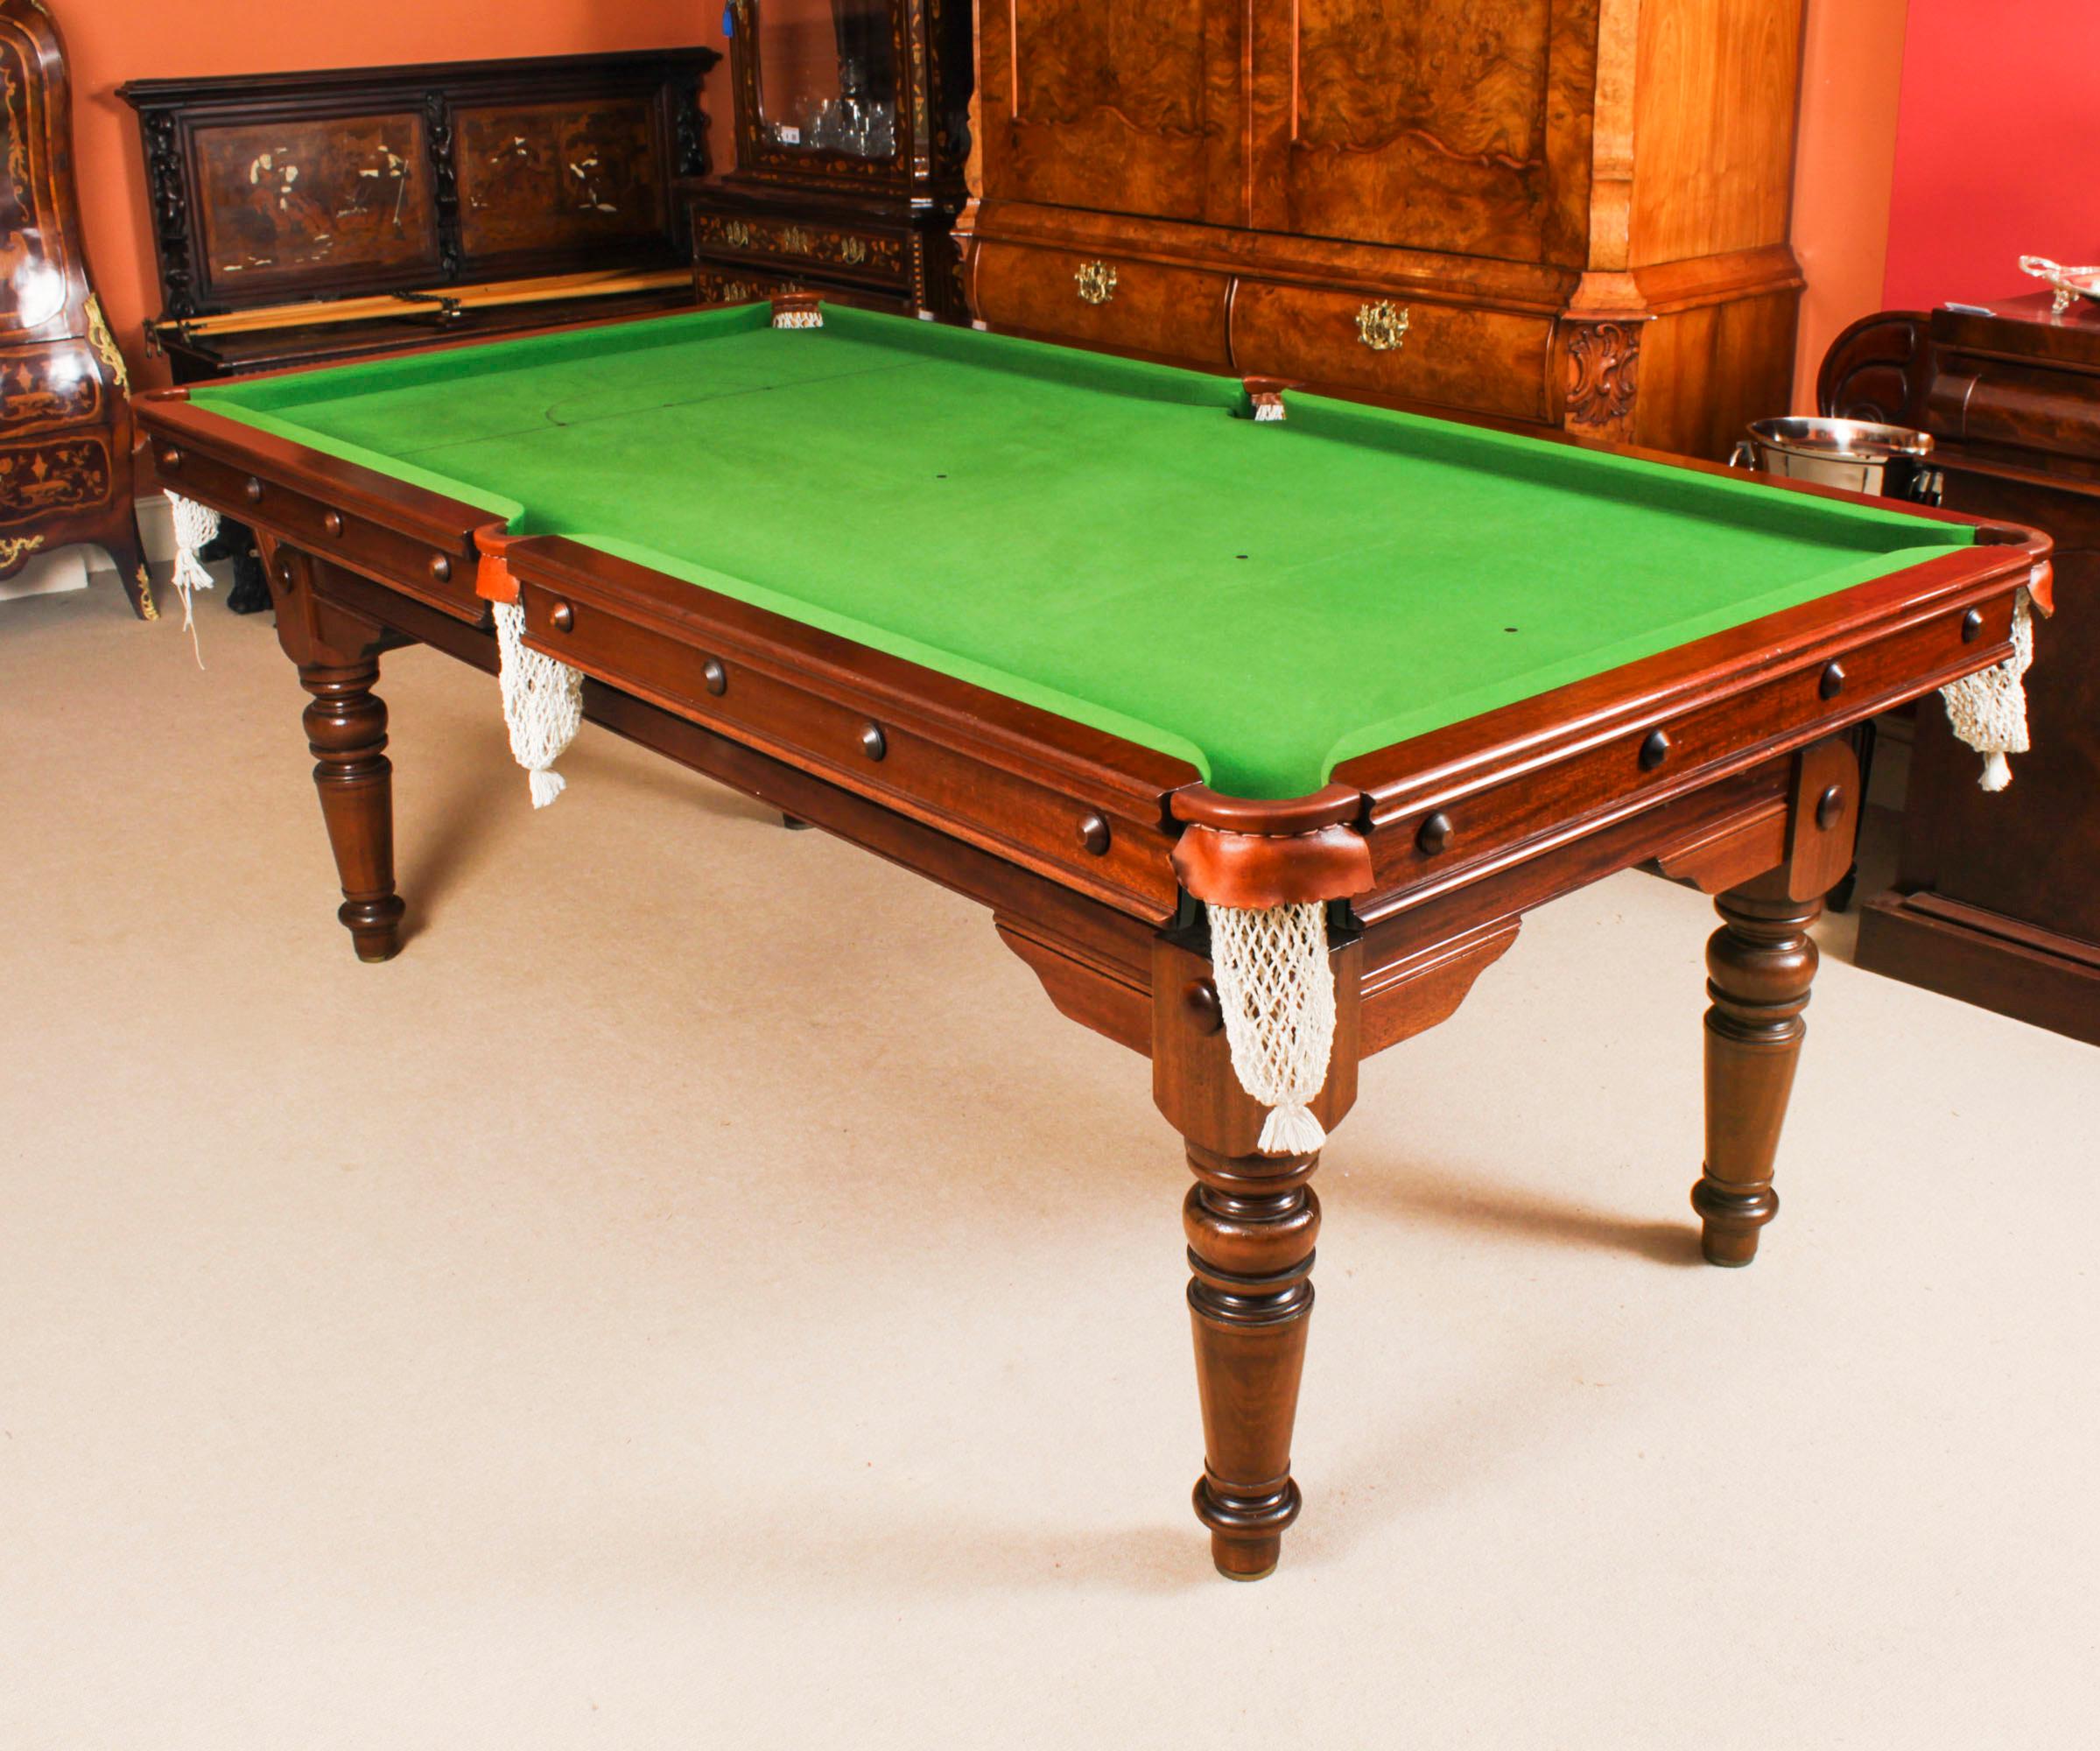 A superb antique Edwardian metamorphic  snooker billiards table /dining table by E.J.Riley Circa 1900 in date restored by the renowned billiards table makers Hamilton & Tucker.
 
This table will stand out in your living room, can comfortably seat